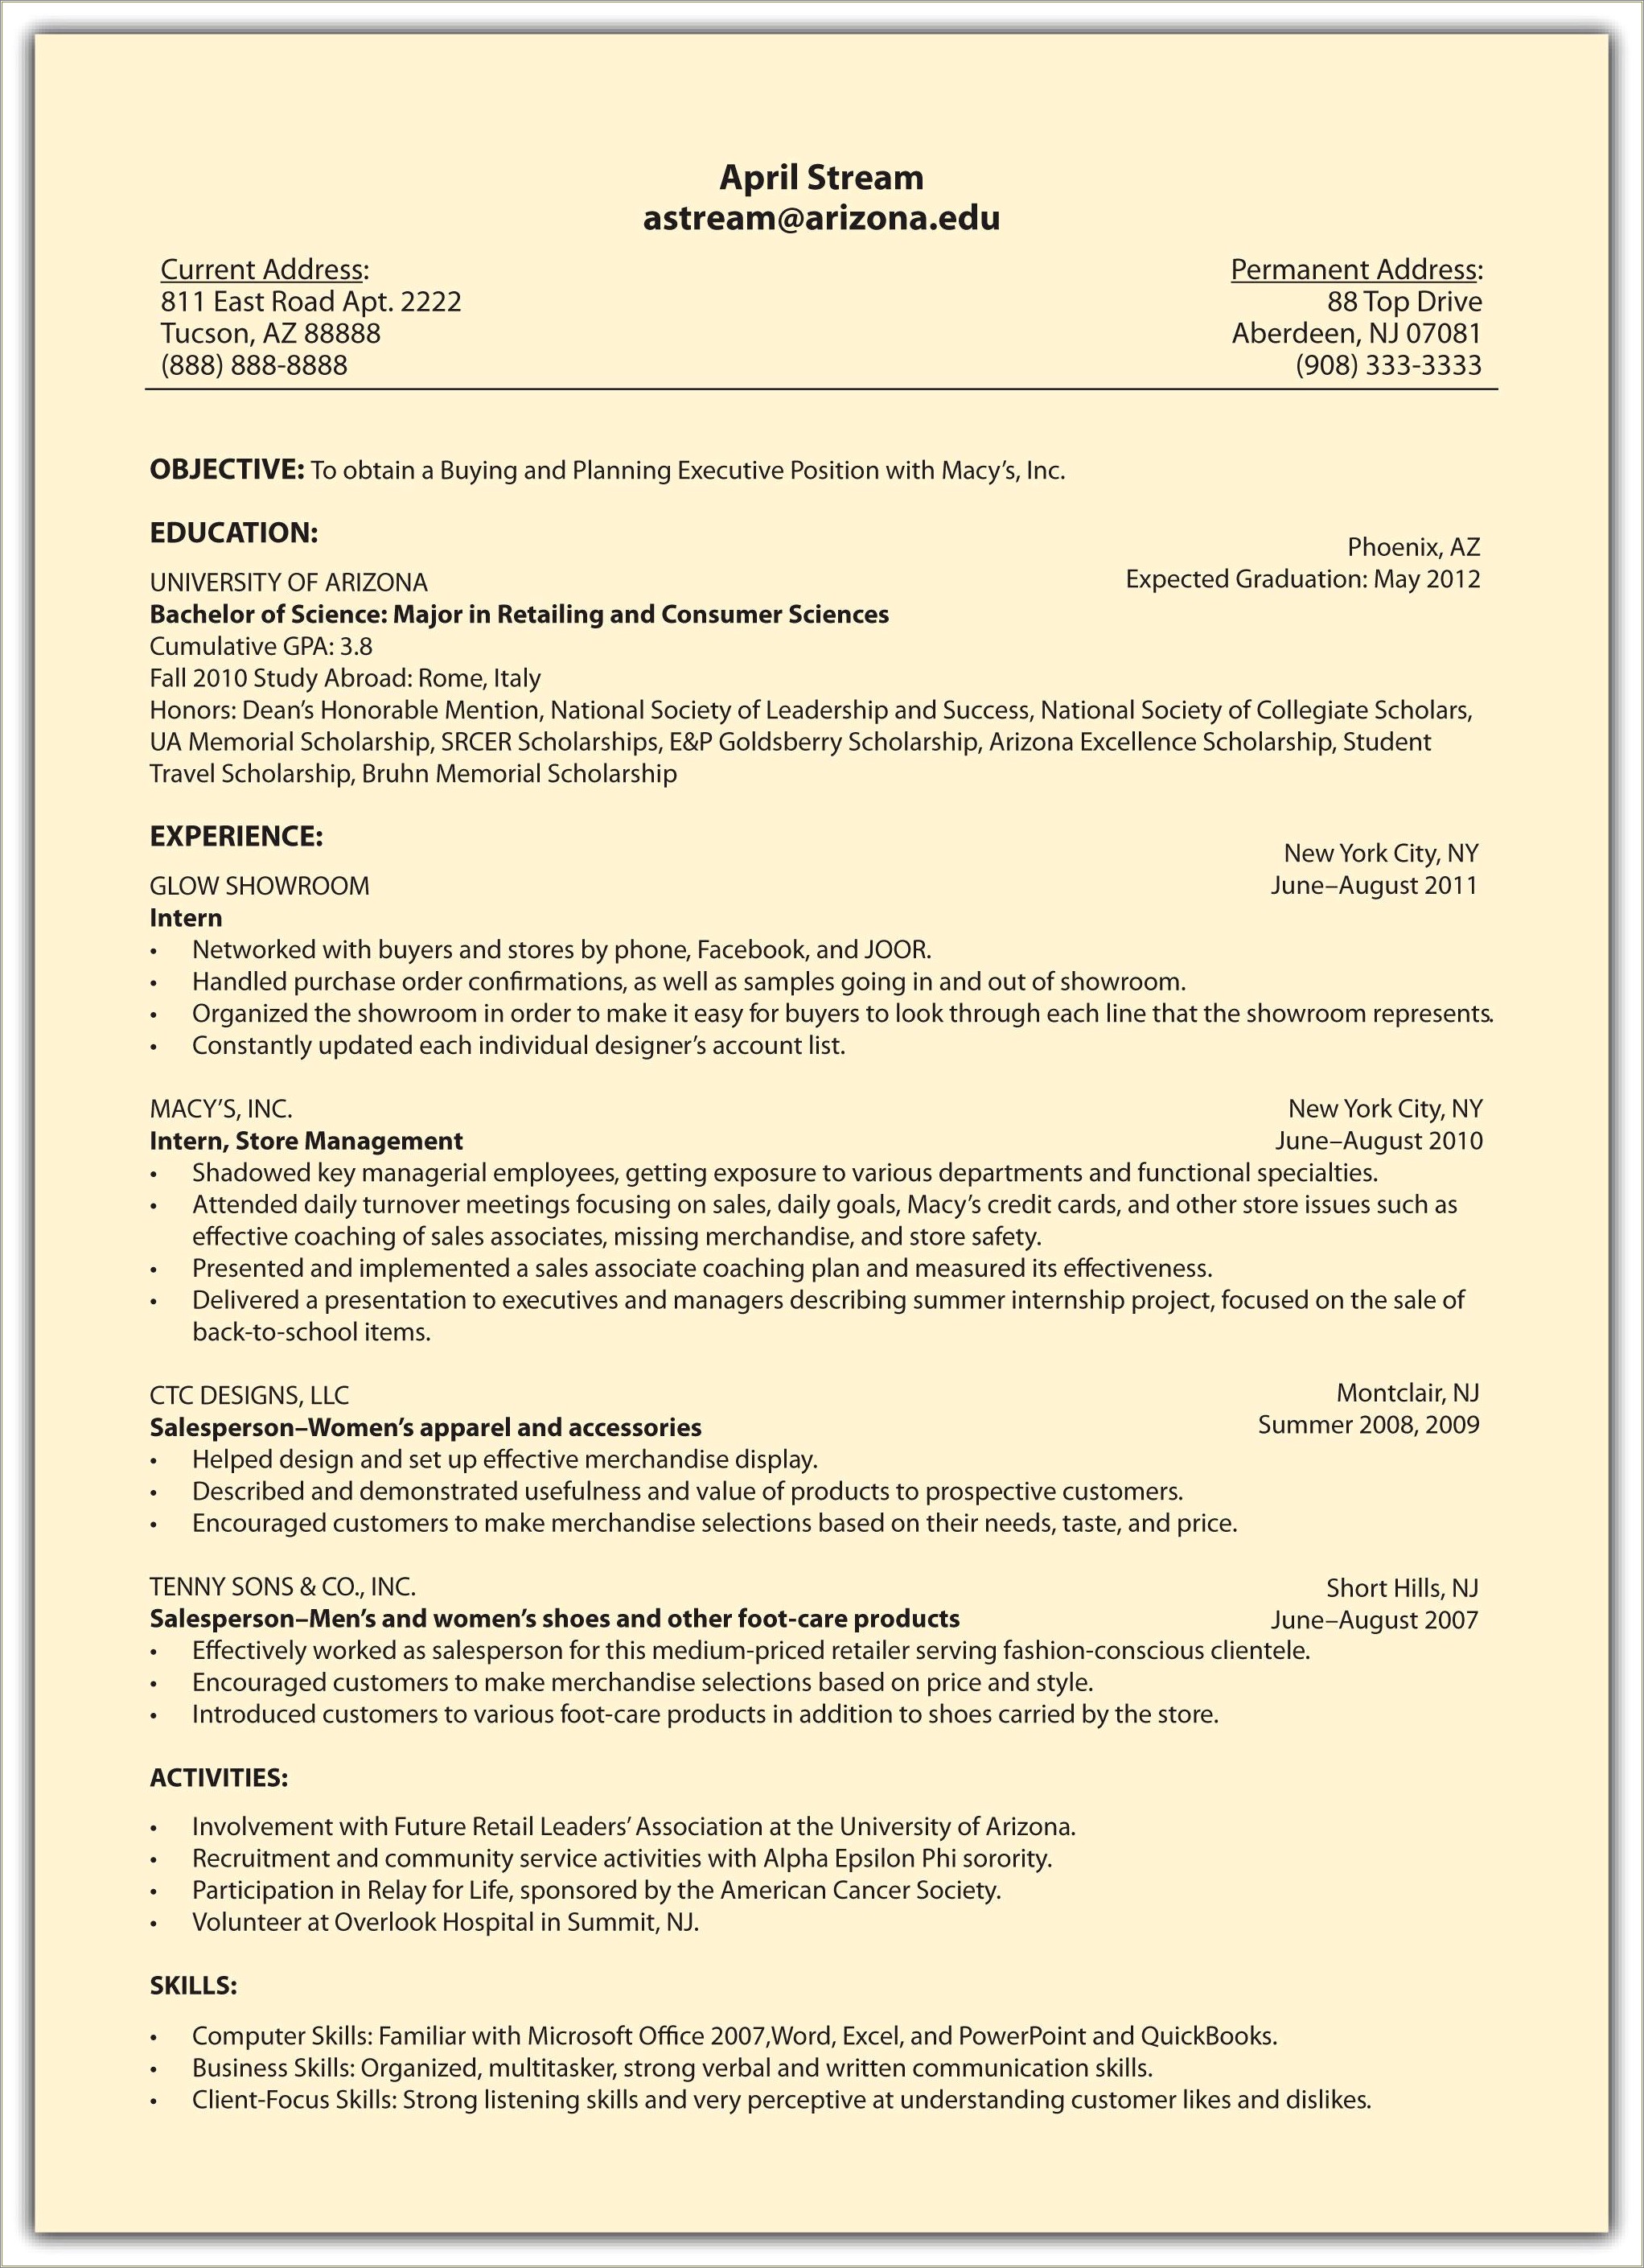 Listing Your Own Llc As Job On Resume